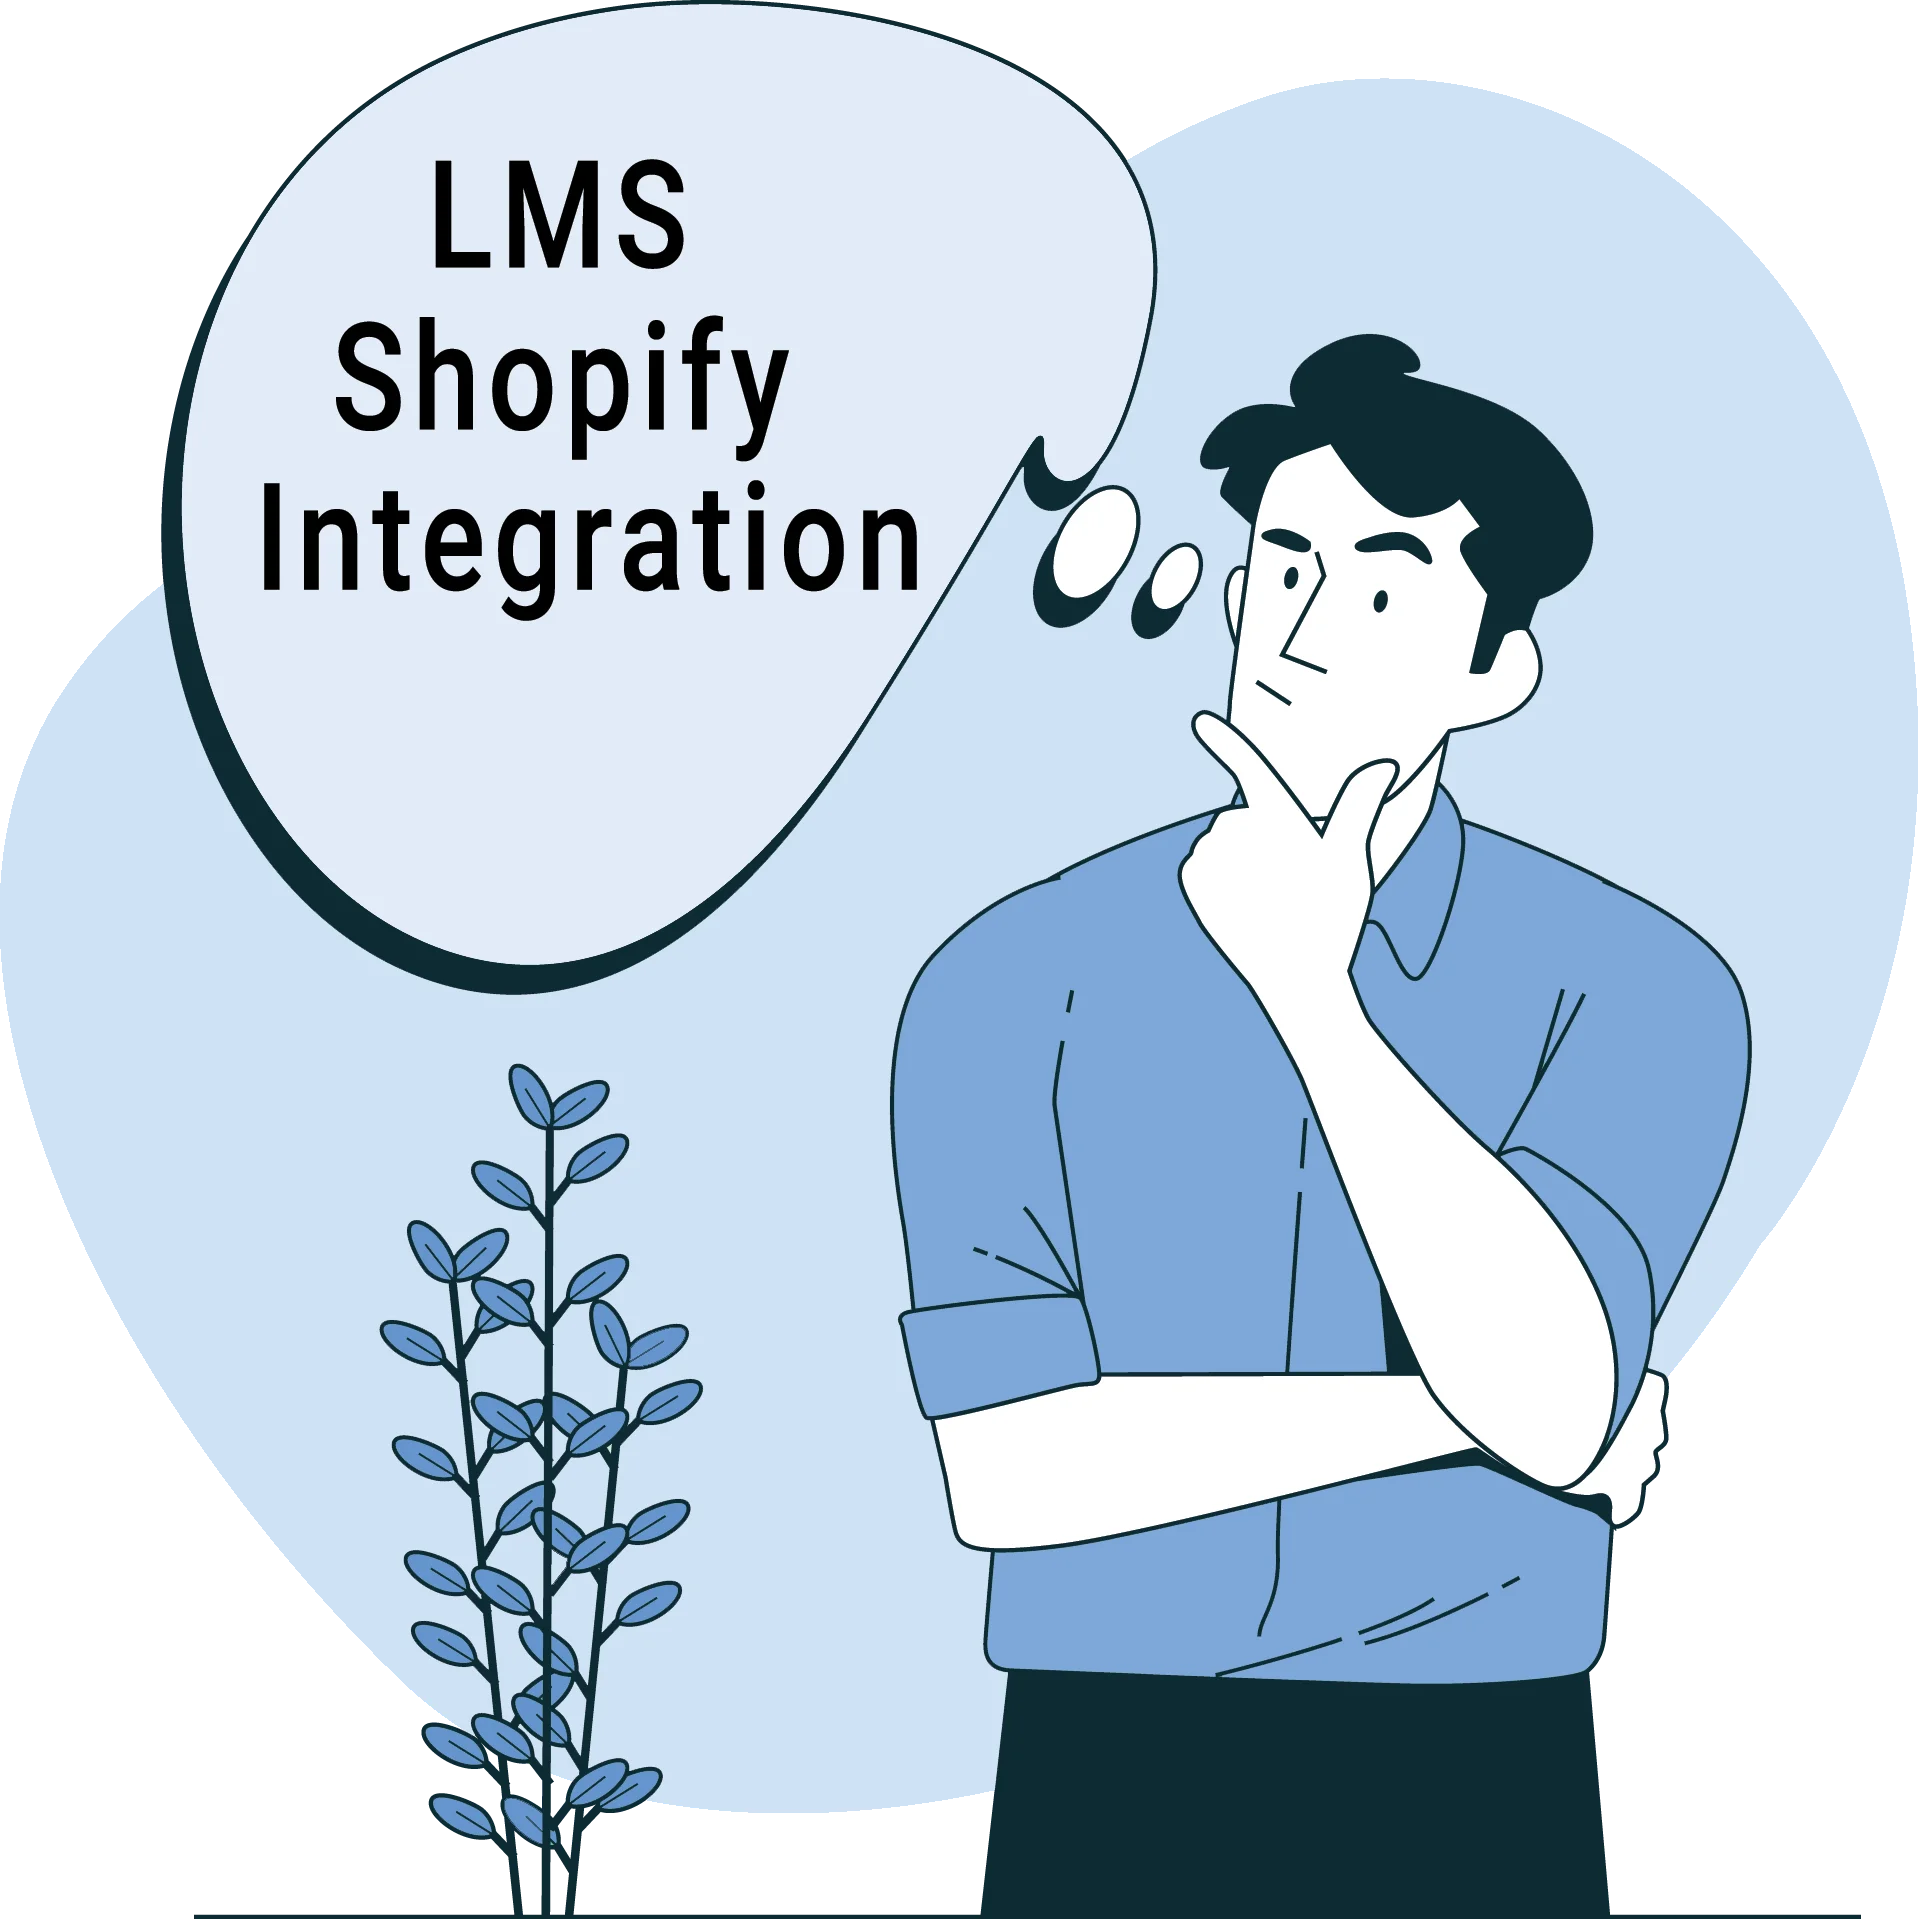 Shopify SSO into lms - shopify lms integration - what is the purpose